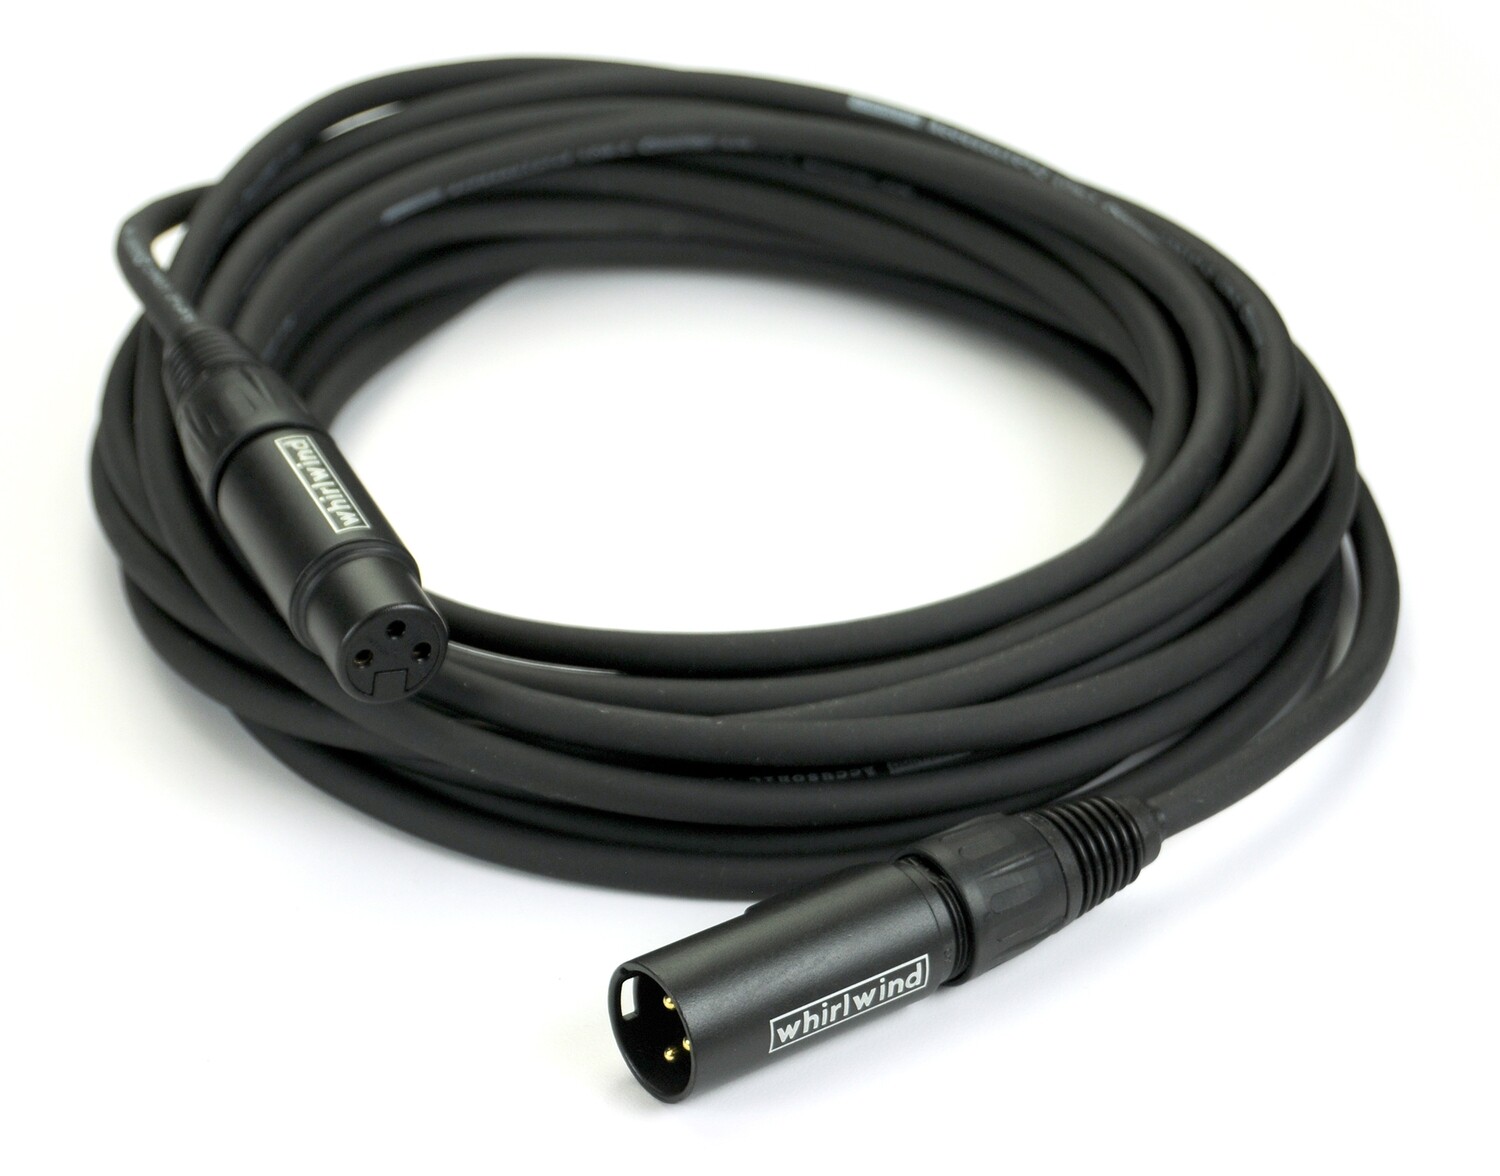 Whirlwind MK4 Series XLR Cable